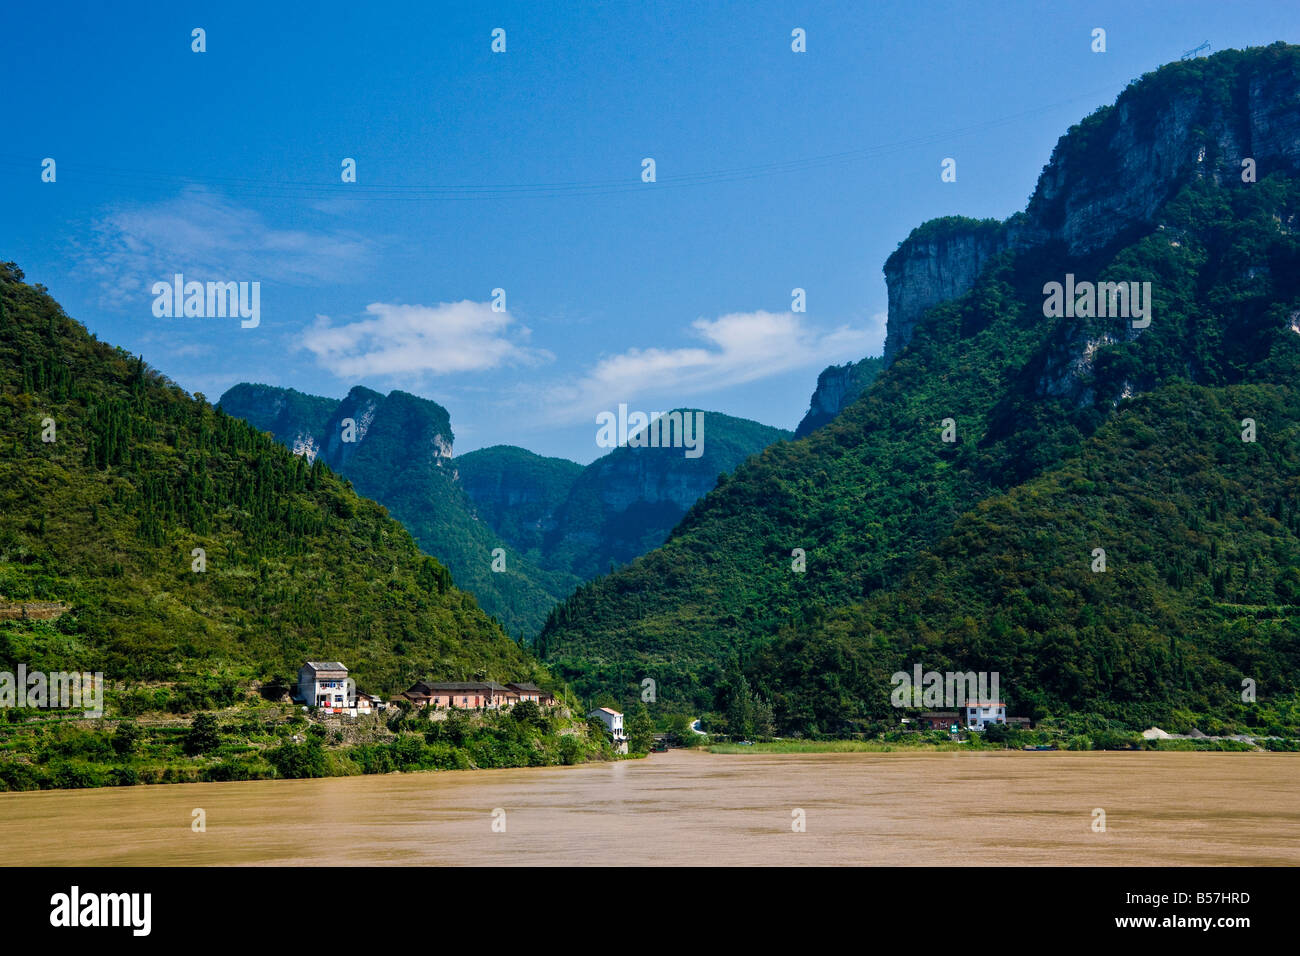 Xiling Gorge Yangzi River between Sandouping and Yichang downstream from Three Gorges Dam China JMH3457 Stock Photo